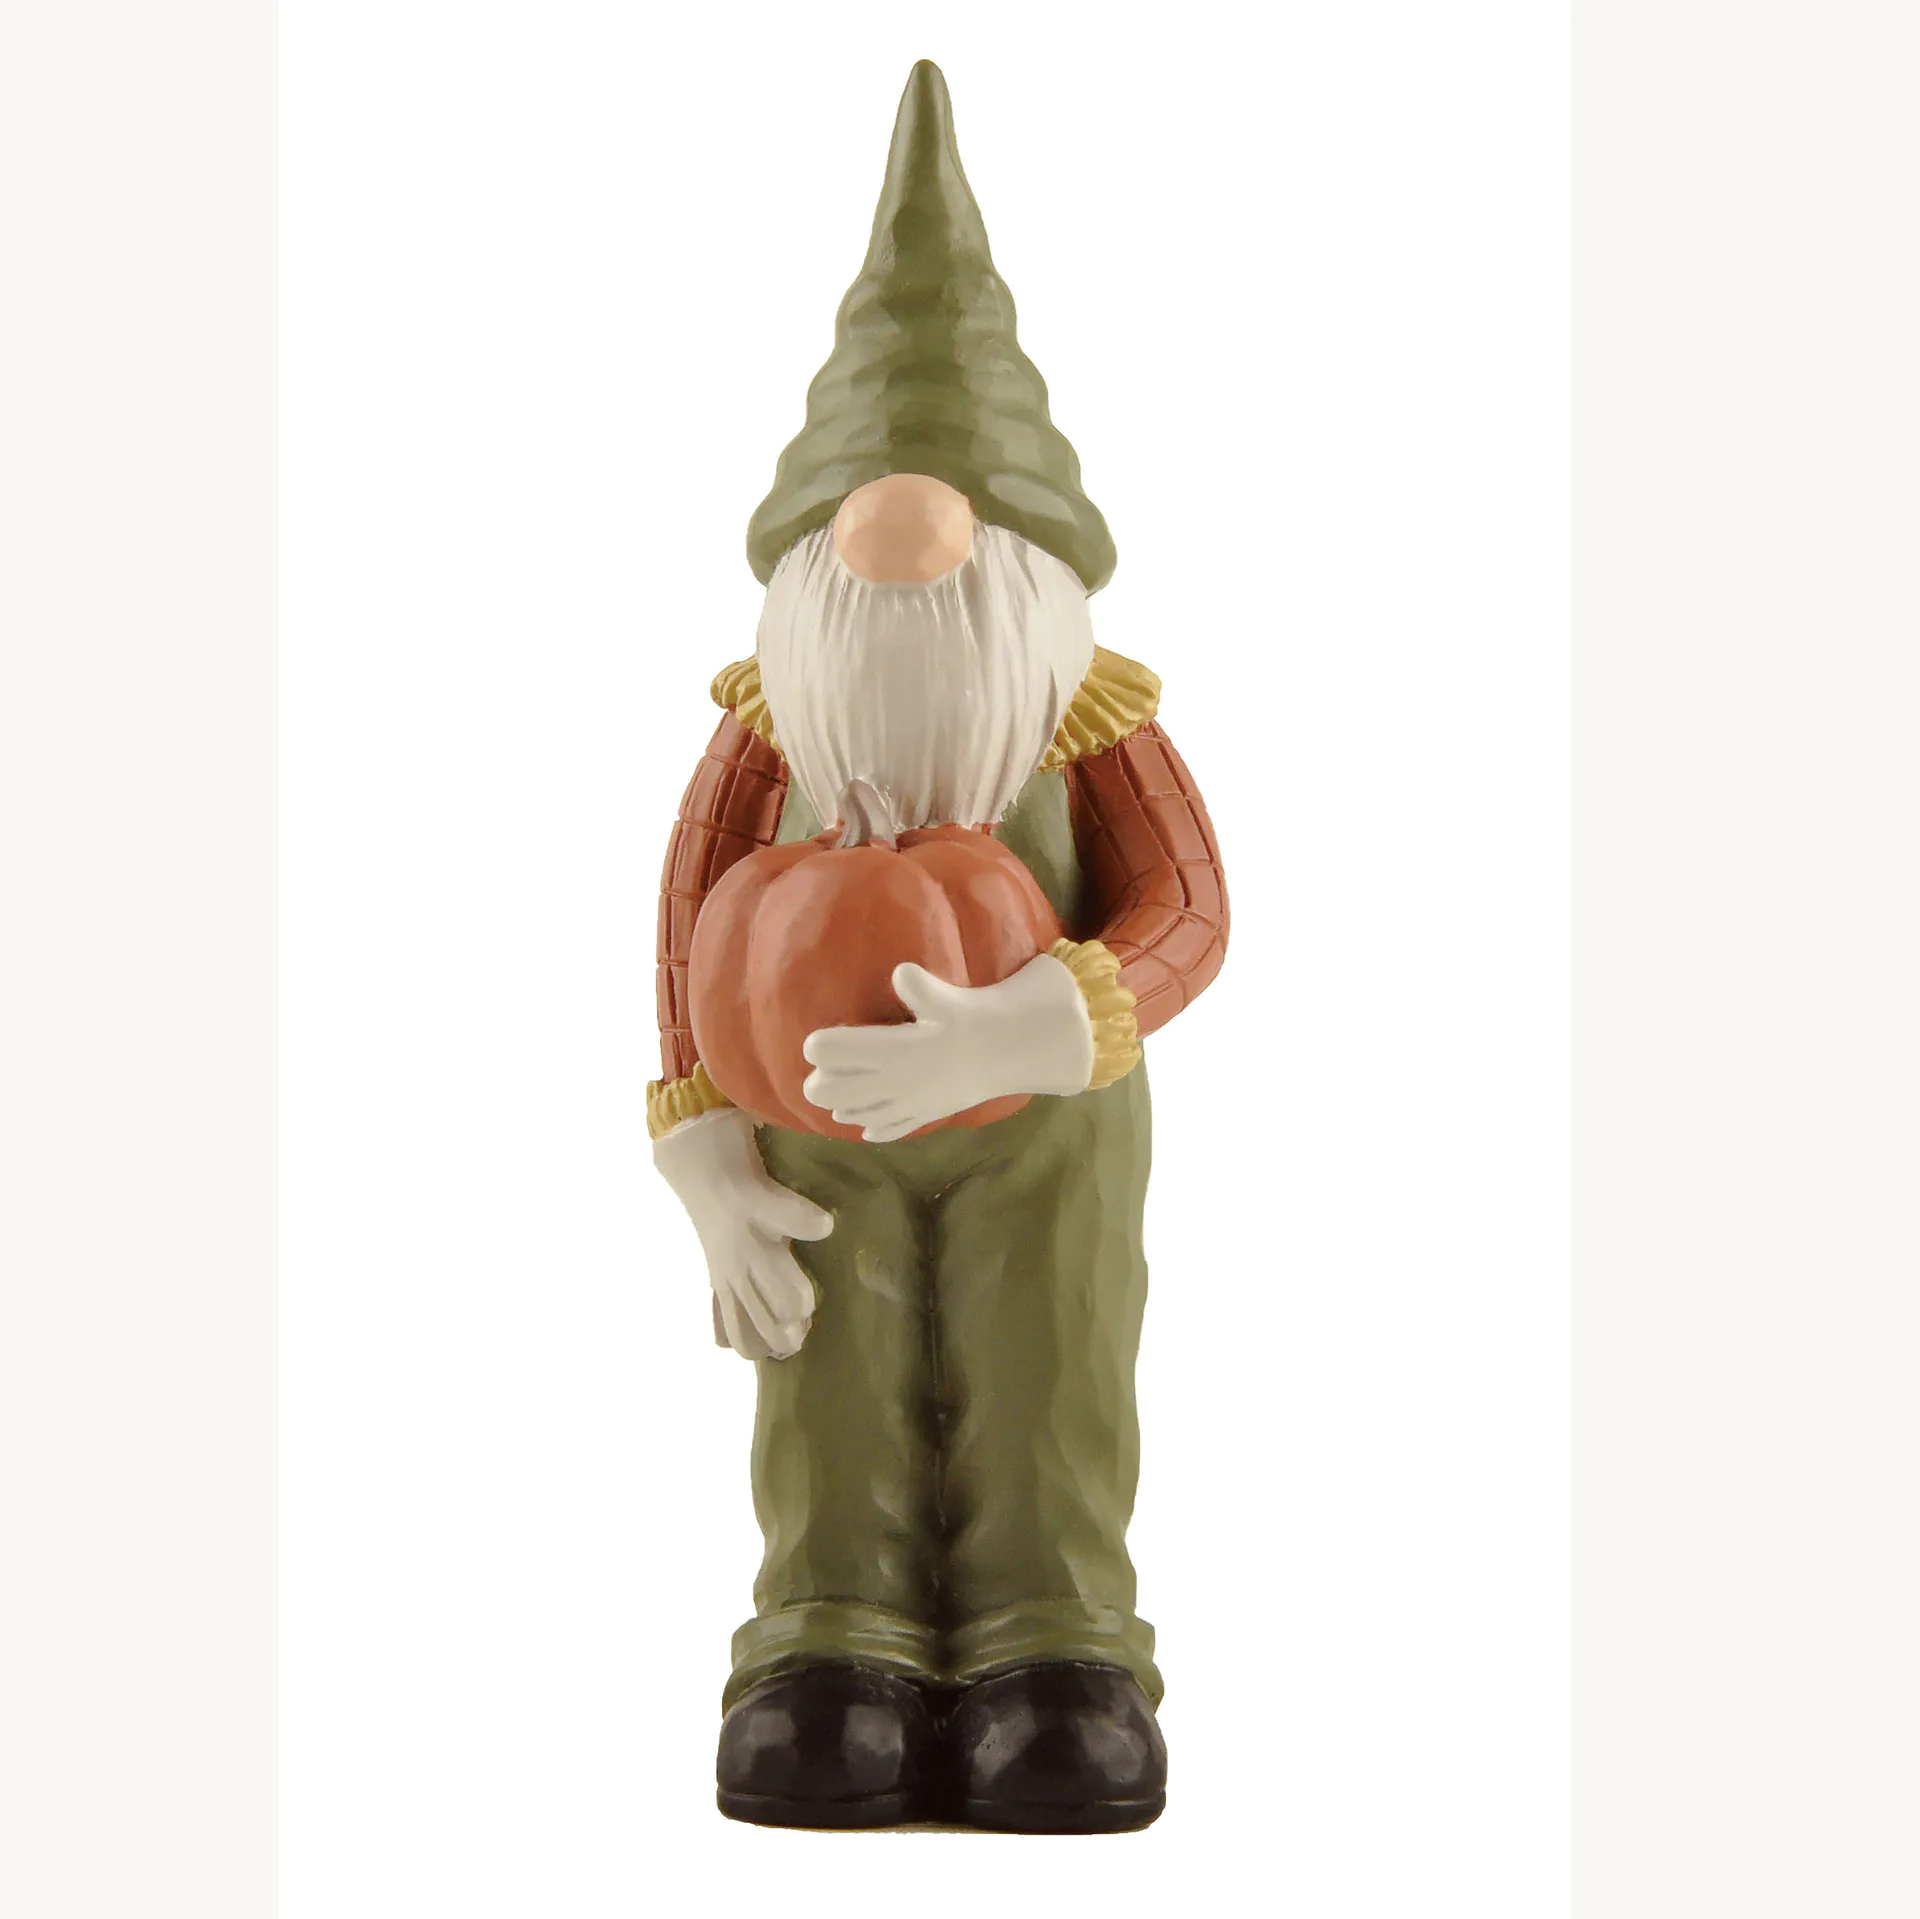 Collectible Handcrafted Resin Gnome Statue with Pumpkin Embrace, Perfect for Home and Garden Decor236-13860